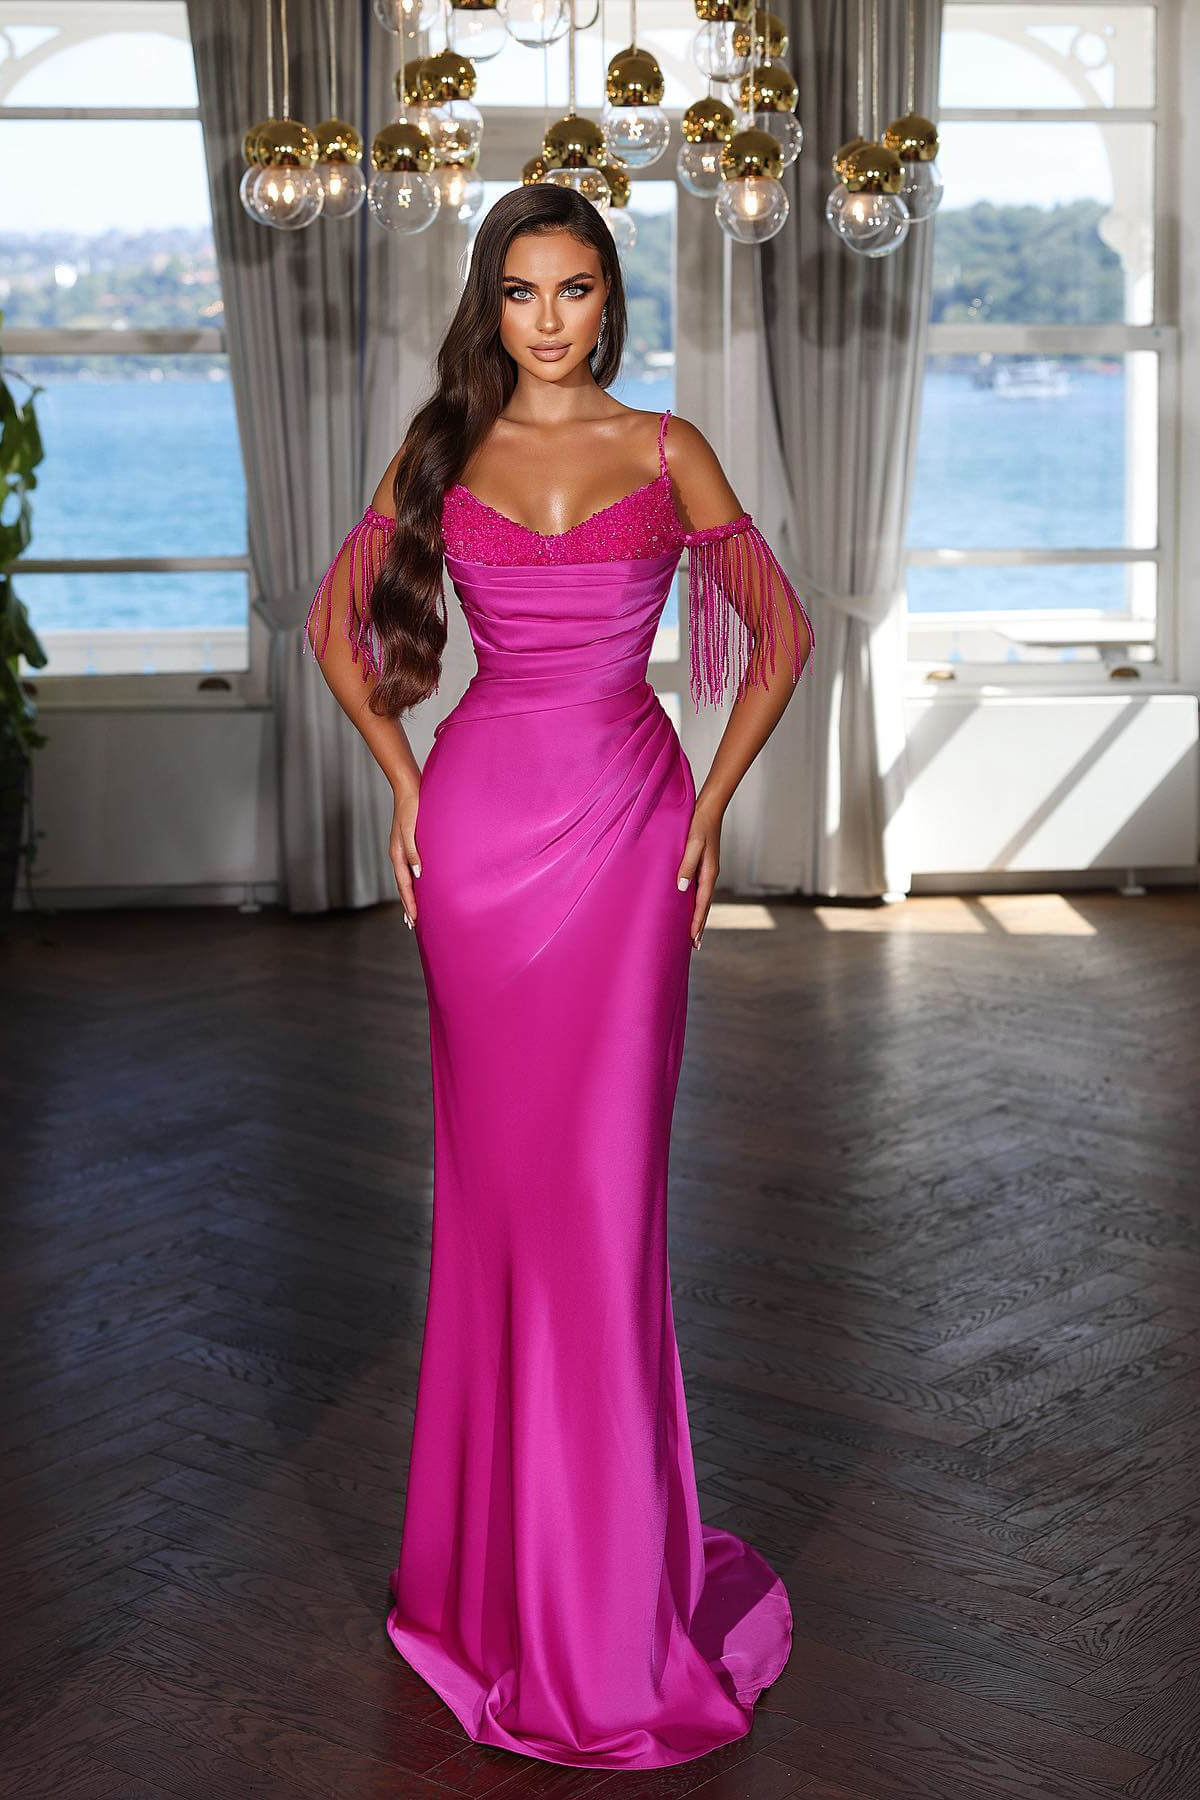 Classic Spaghetti Straps Mermaid Evening Dress with Beads